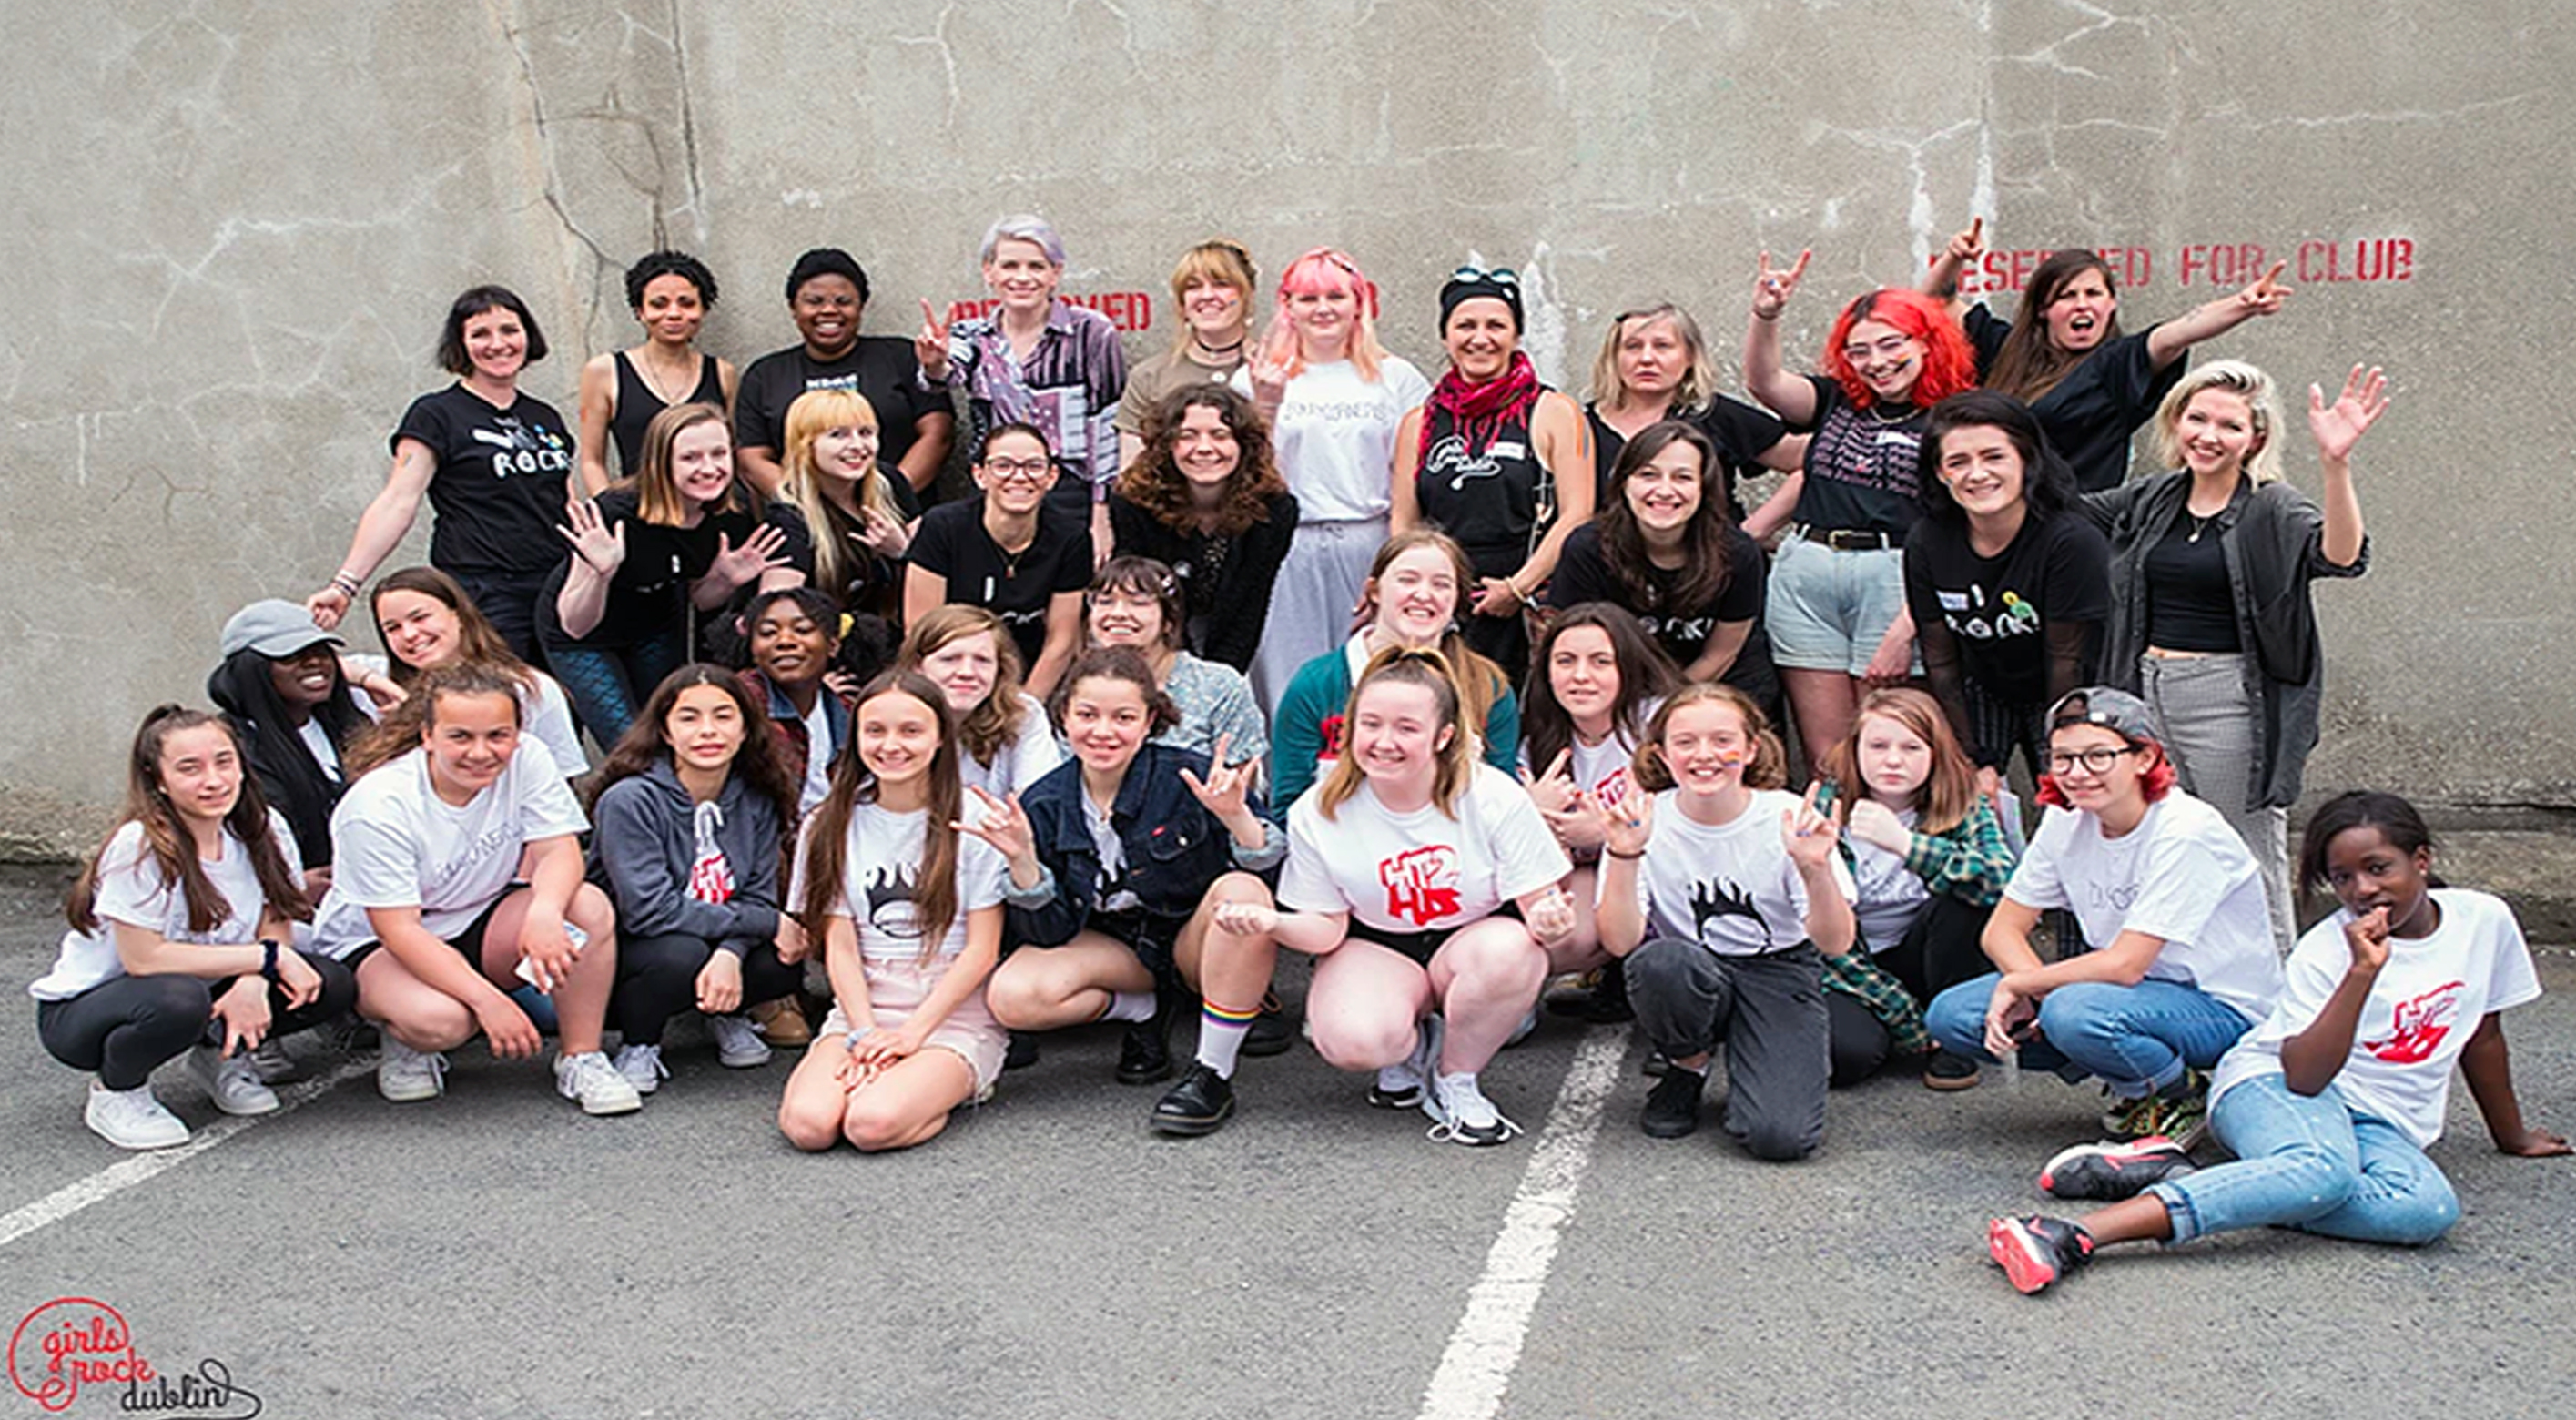 A group of teenage girls and non-binary people sitting or standing in front of a grey wall wearing Girls Rock Dublin t-shirts and looking happy.